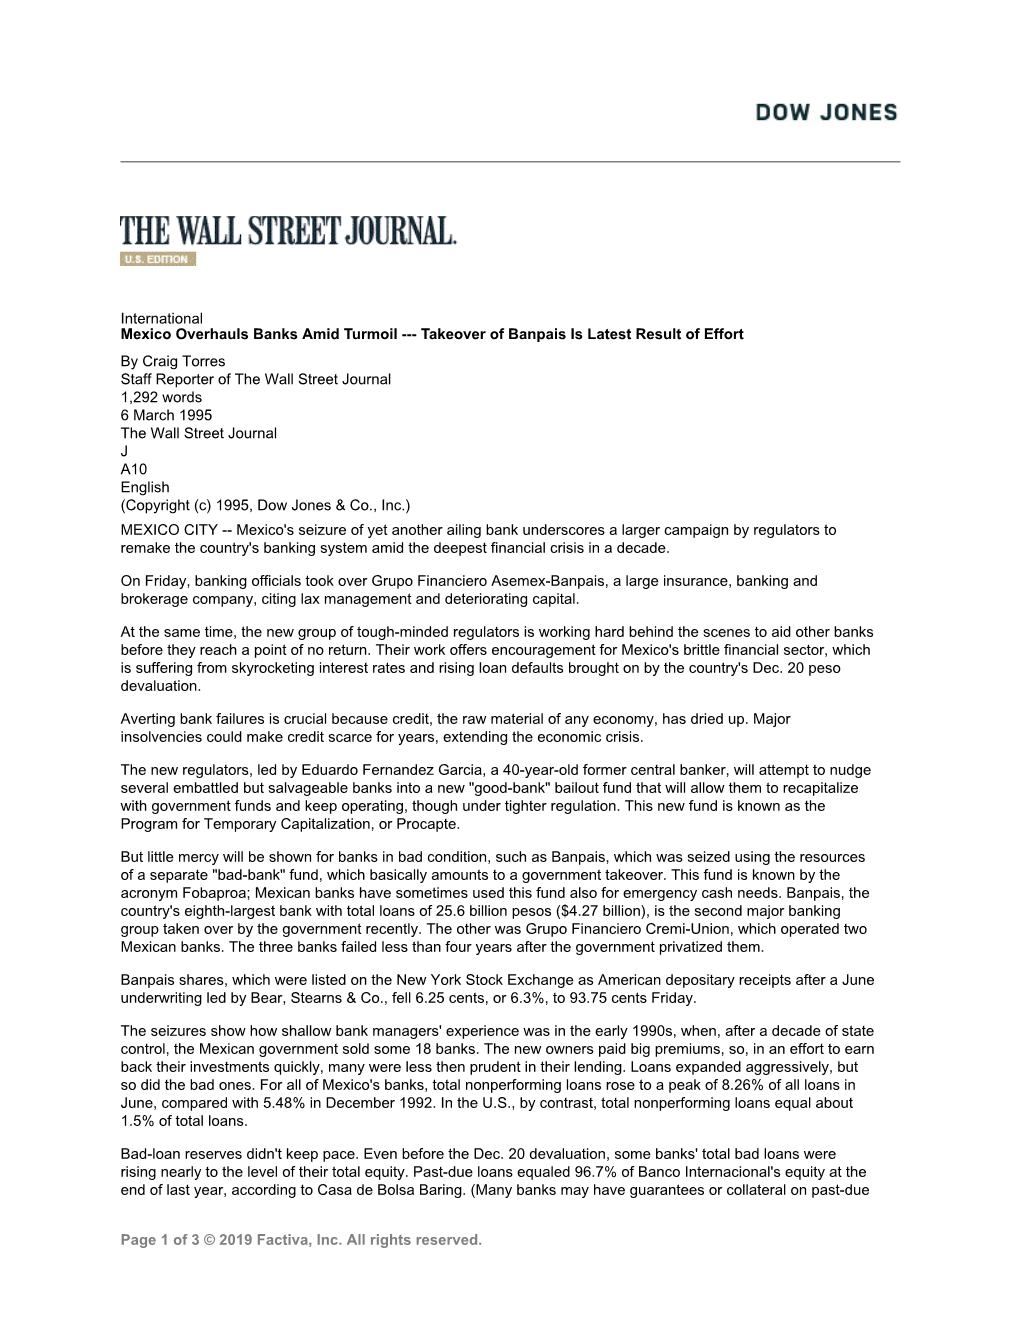 Page 1 of 3 © 2019 Factiva, Inc. All Rights Reserved. International Mexico Overhauls Banks Amid Turmoil --- Takeover of Banpais